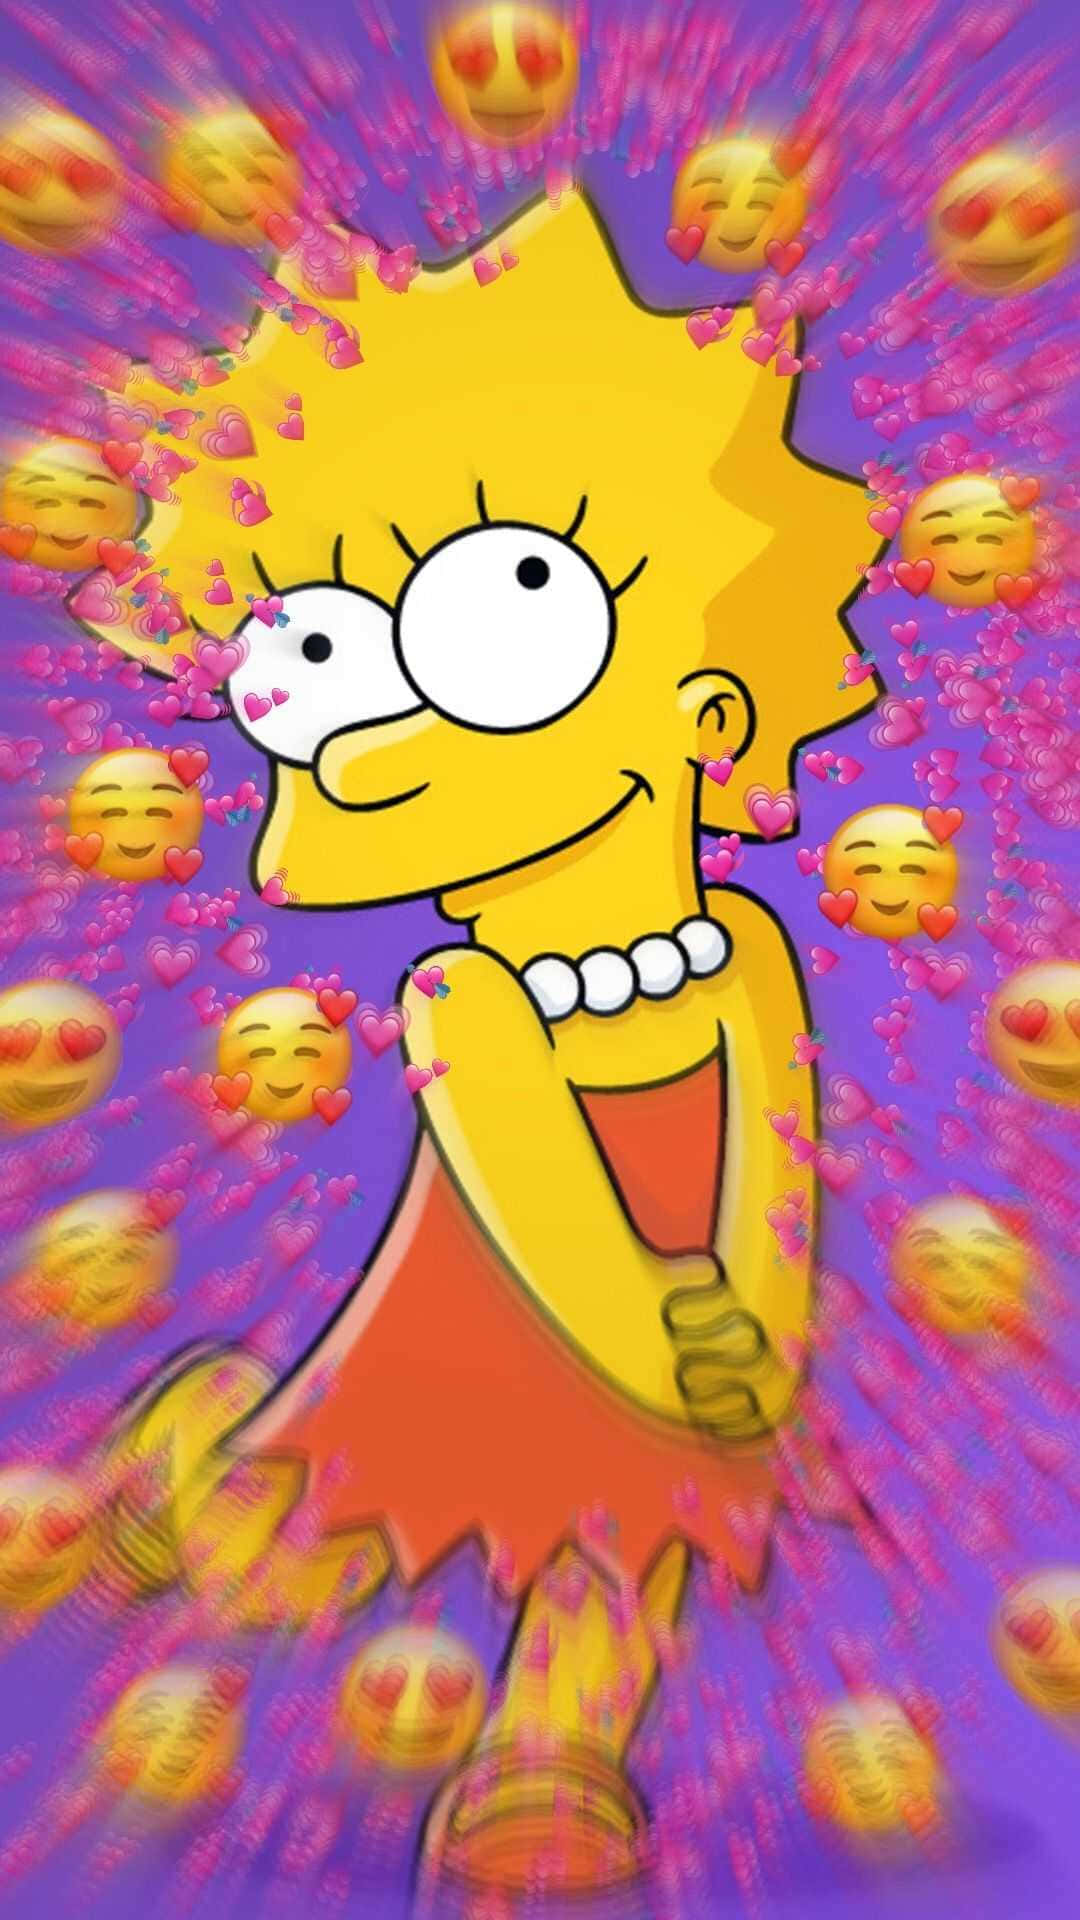 The Simpsons Character Is Surrounded By Emojis Wallpaper